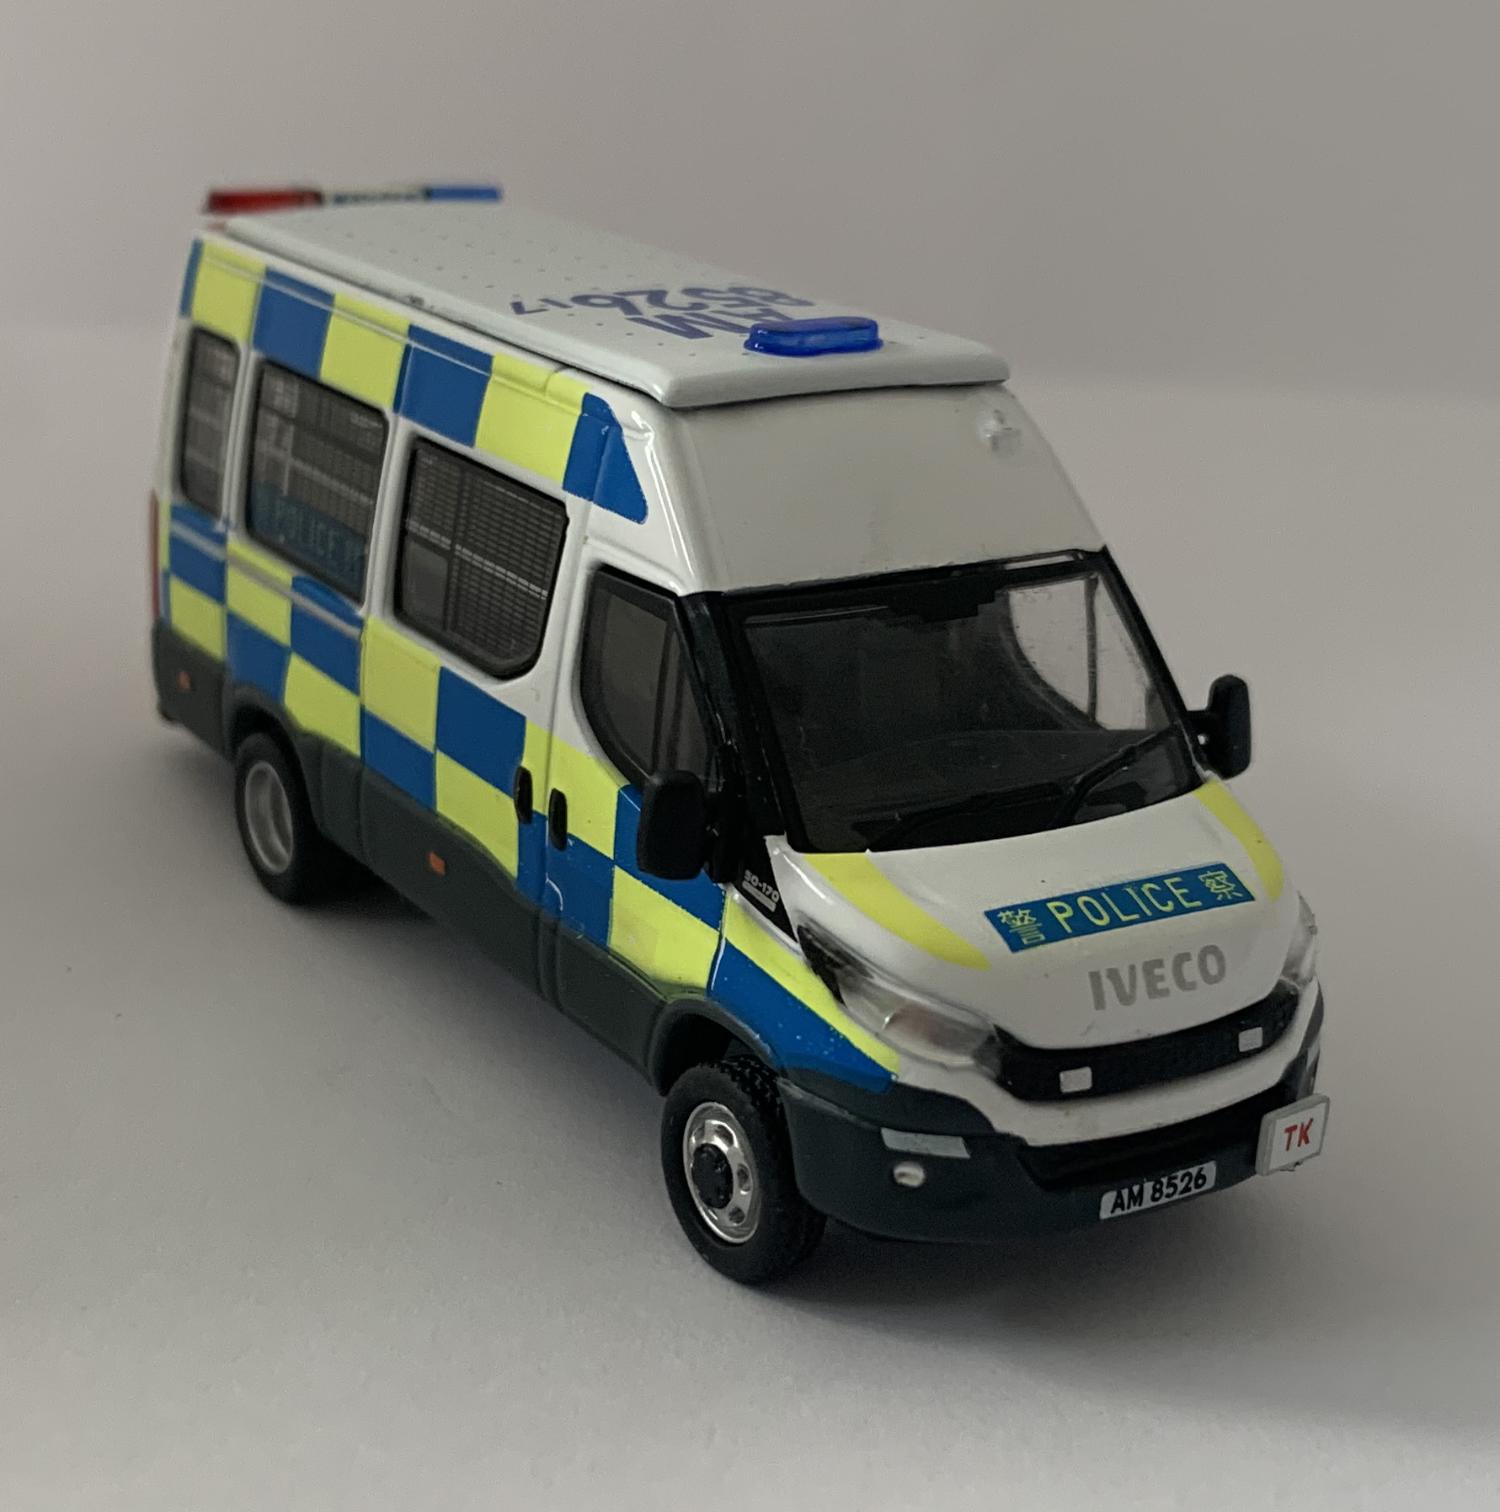 An excellent scale model of an Iveco Daily Hong Kong Police (Traffic) decorated in authentic Hong Kong Police livery, authentic graphics and silver wheels